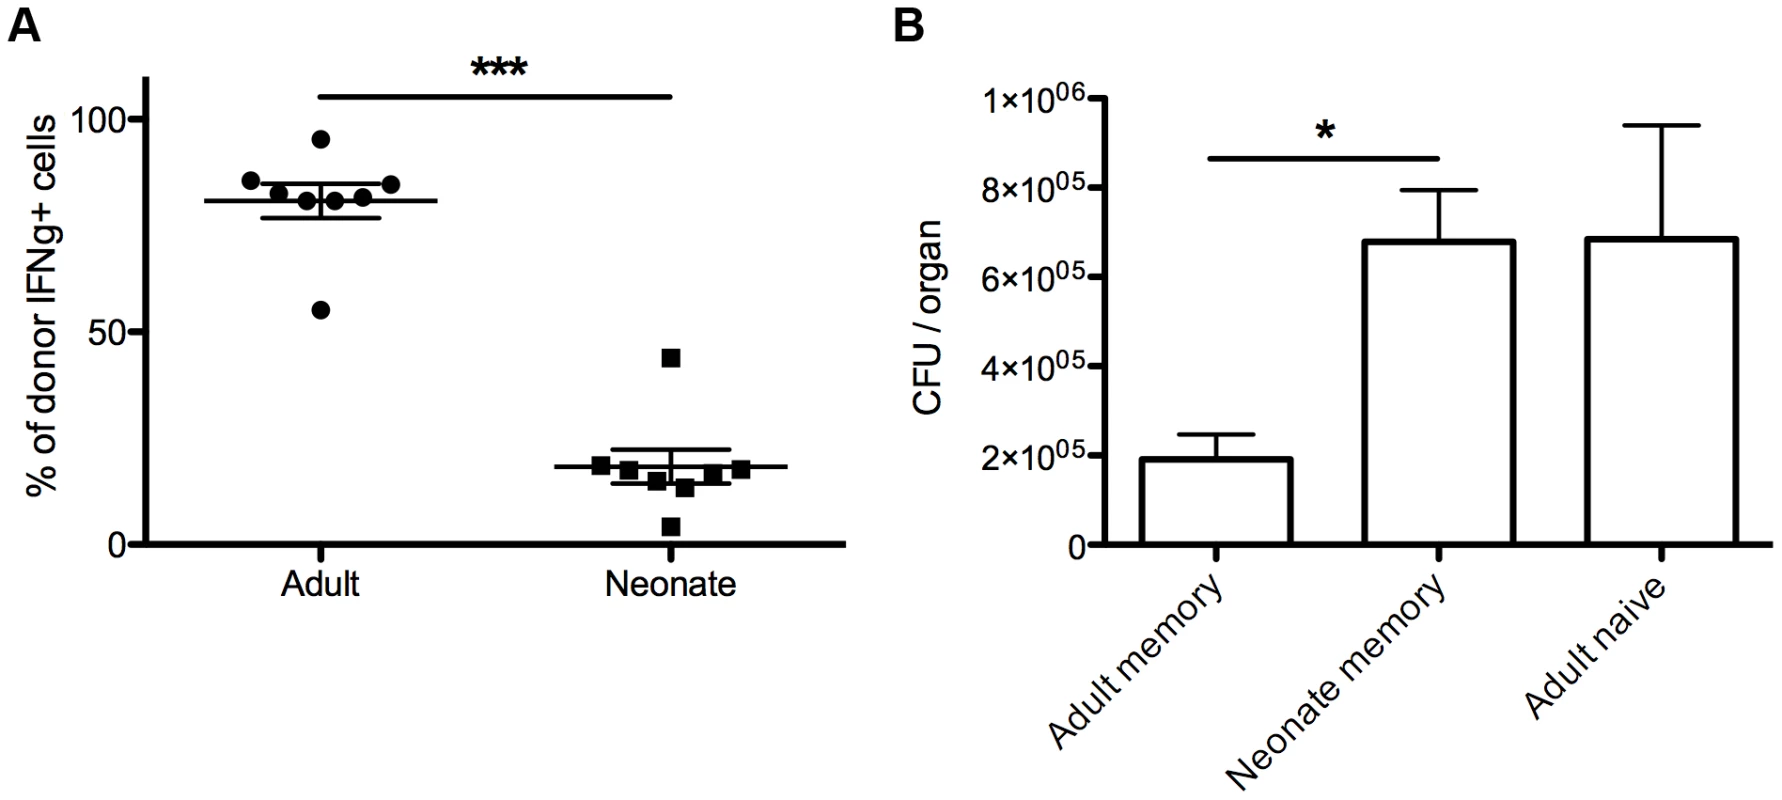 Memory CD8+ T cells from neonatal mice exhibit impaired protective immunity against <i>Listeria monocytogenes</i>.